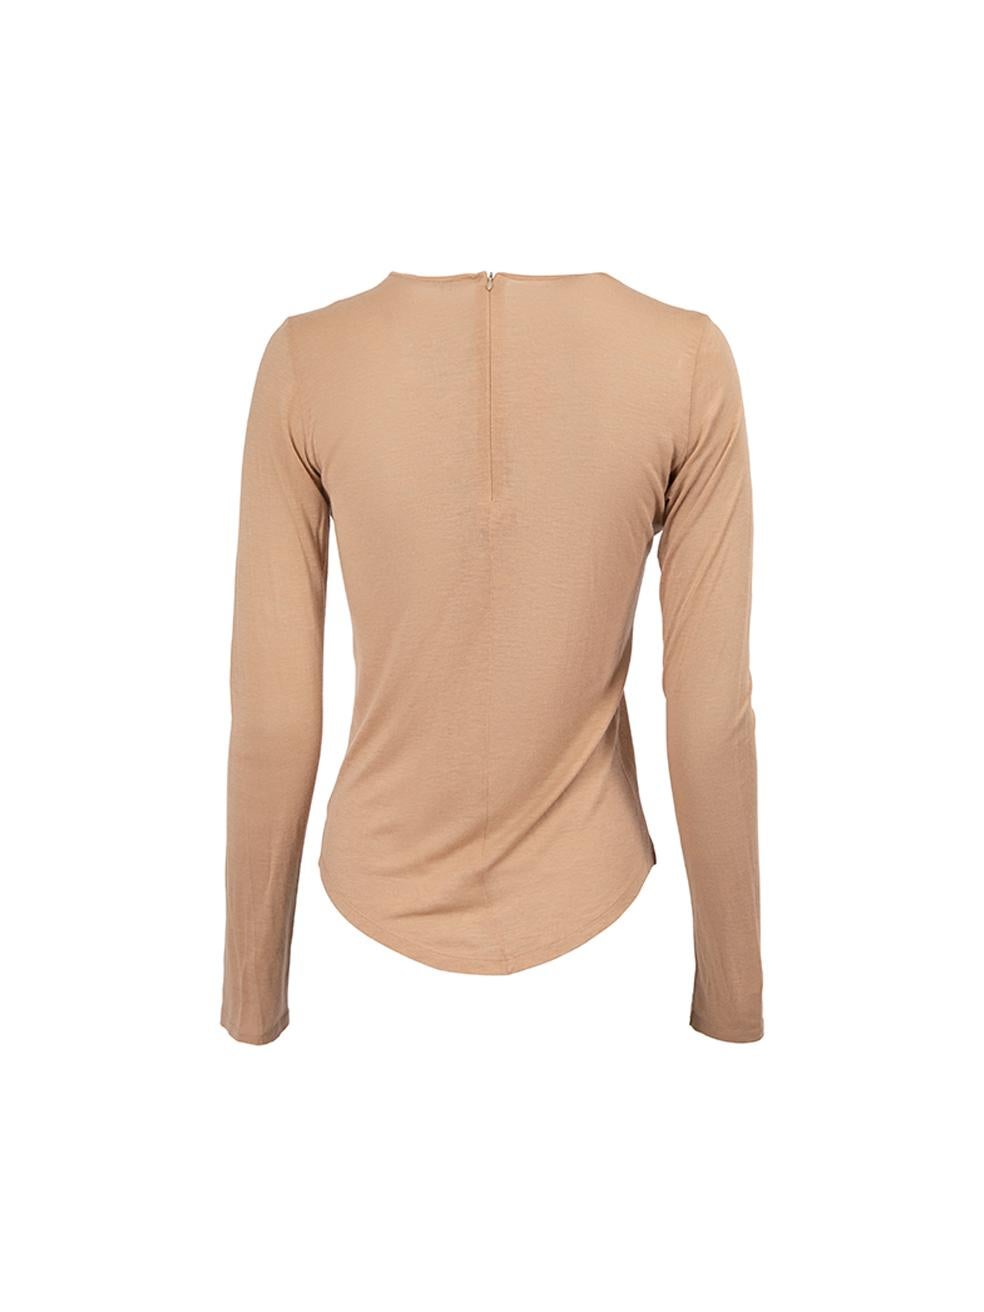 Stella McCartney Women's Nude Long Sleeves Top In Good Condition For Sale In London, GB